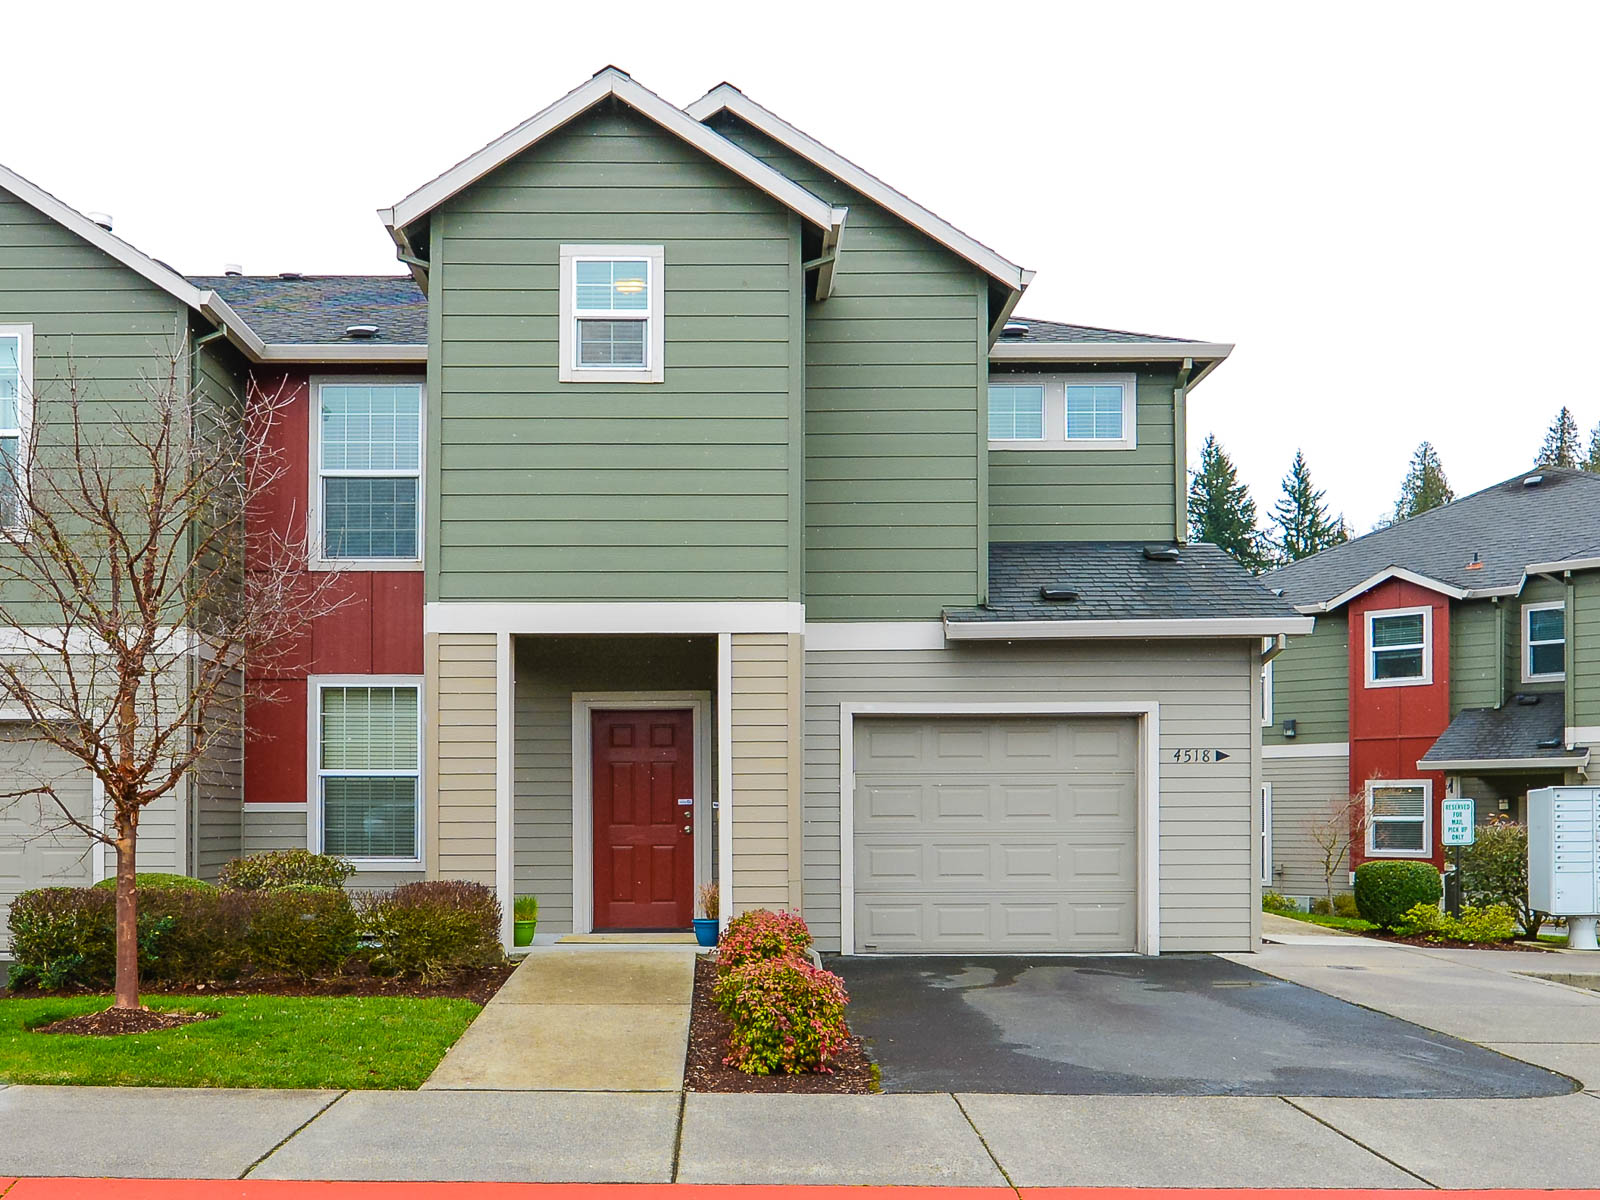 JUST LISTED: Spacious and Serene Gresham Condo